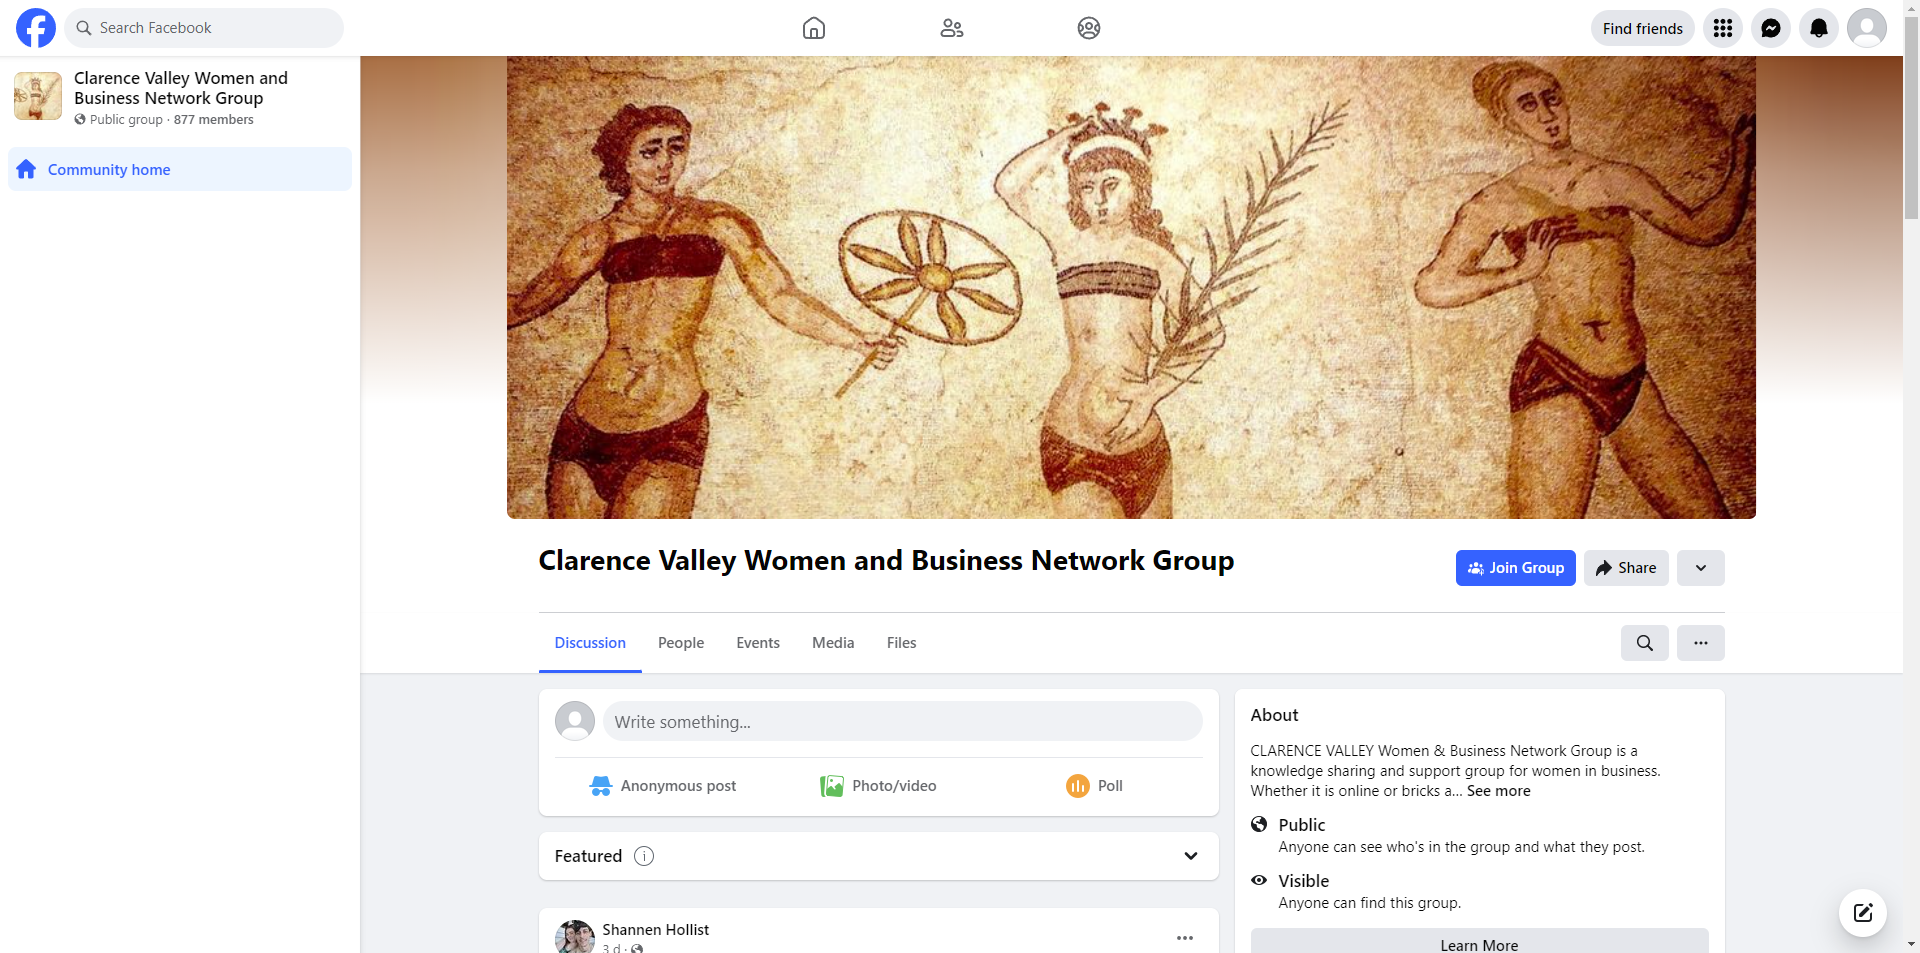 Clarence Valley Women and Business Network Group